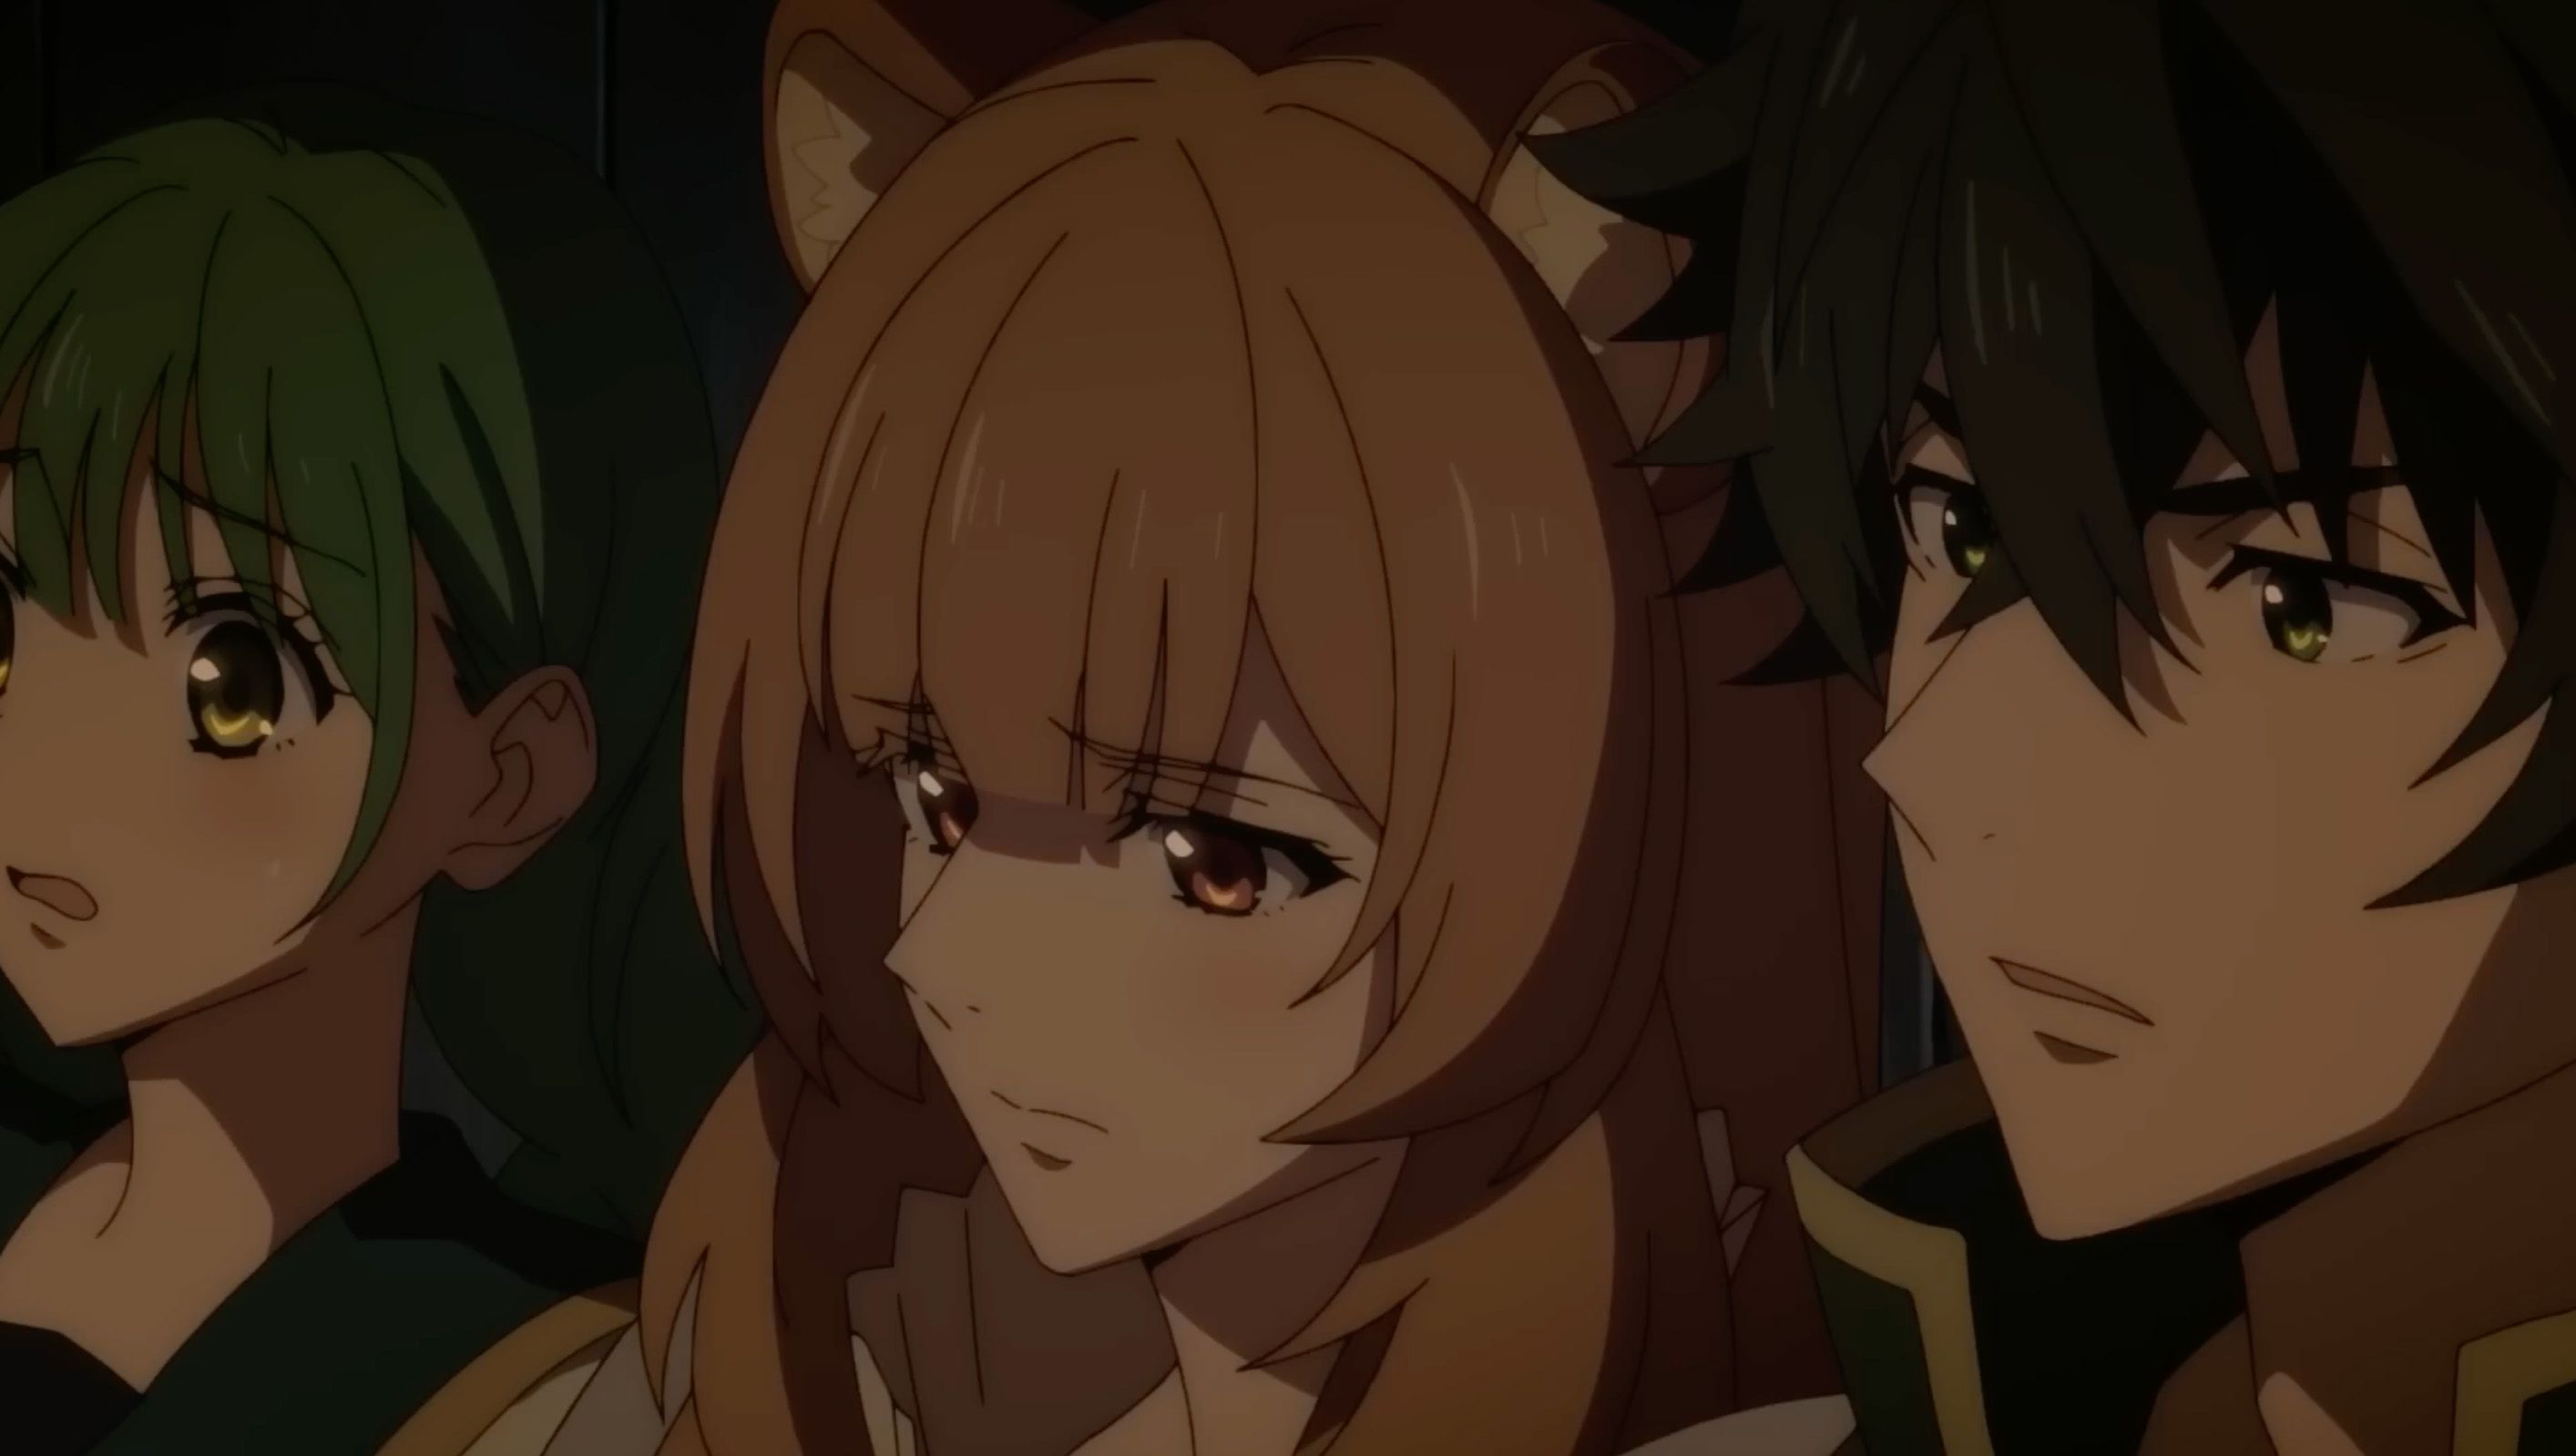 The Rising of the Shield Hero Season 3 Anime: Where to Watch, Trailers,  Cast & More - Crunchyroll News